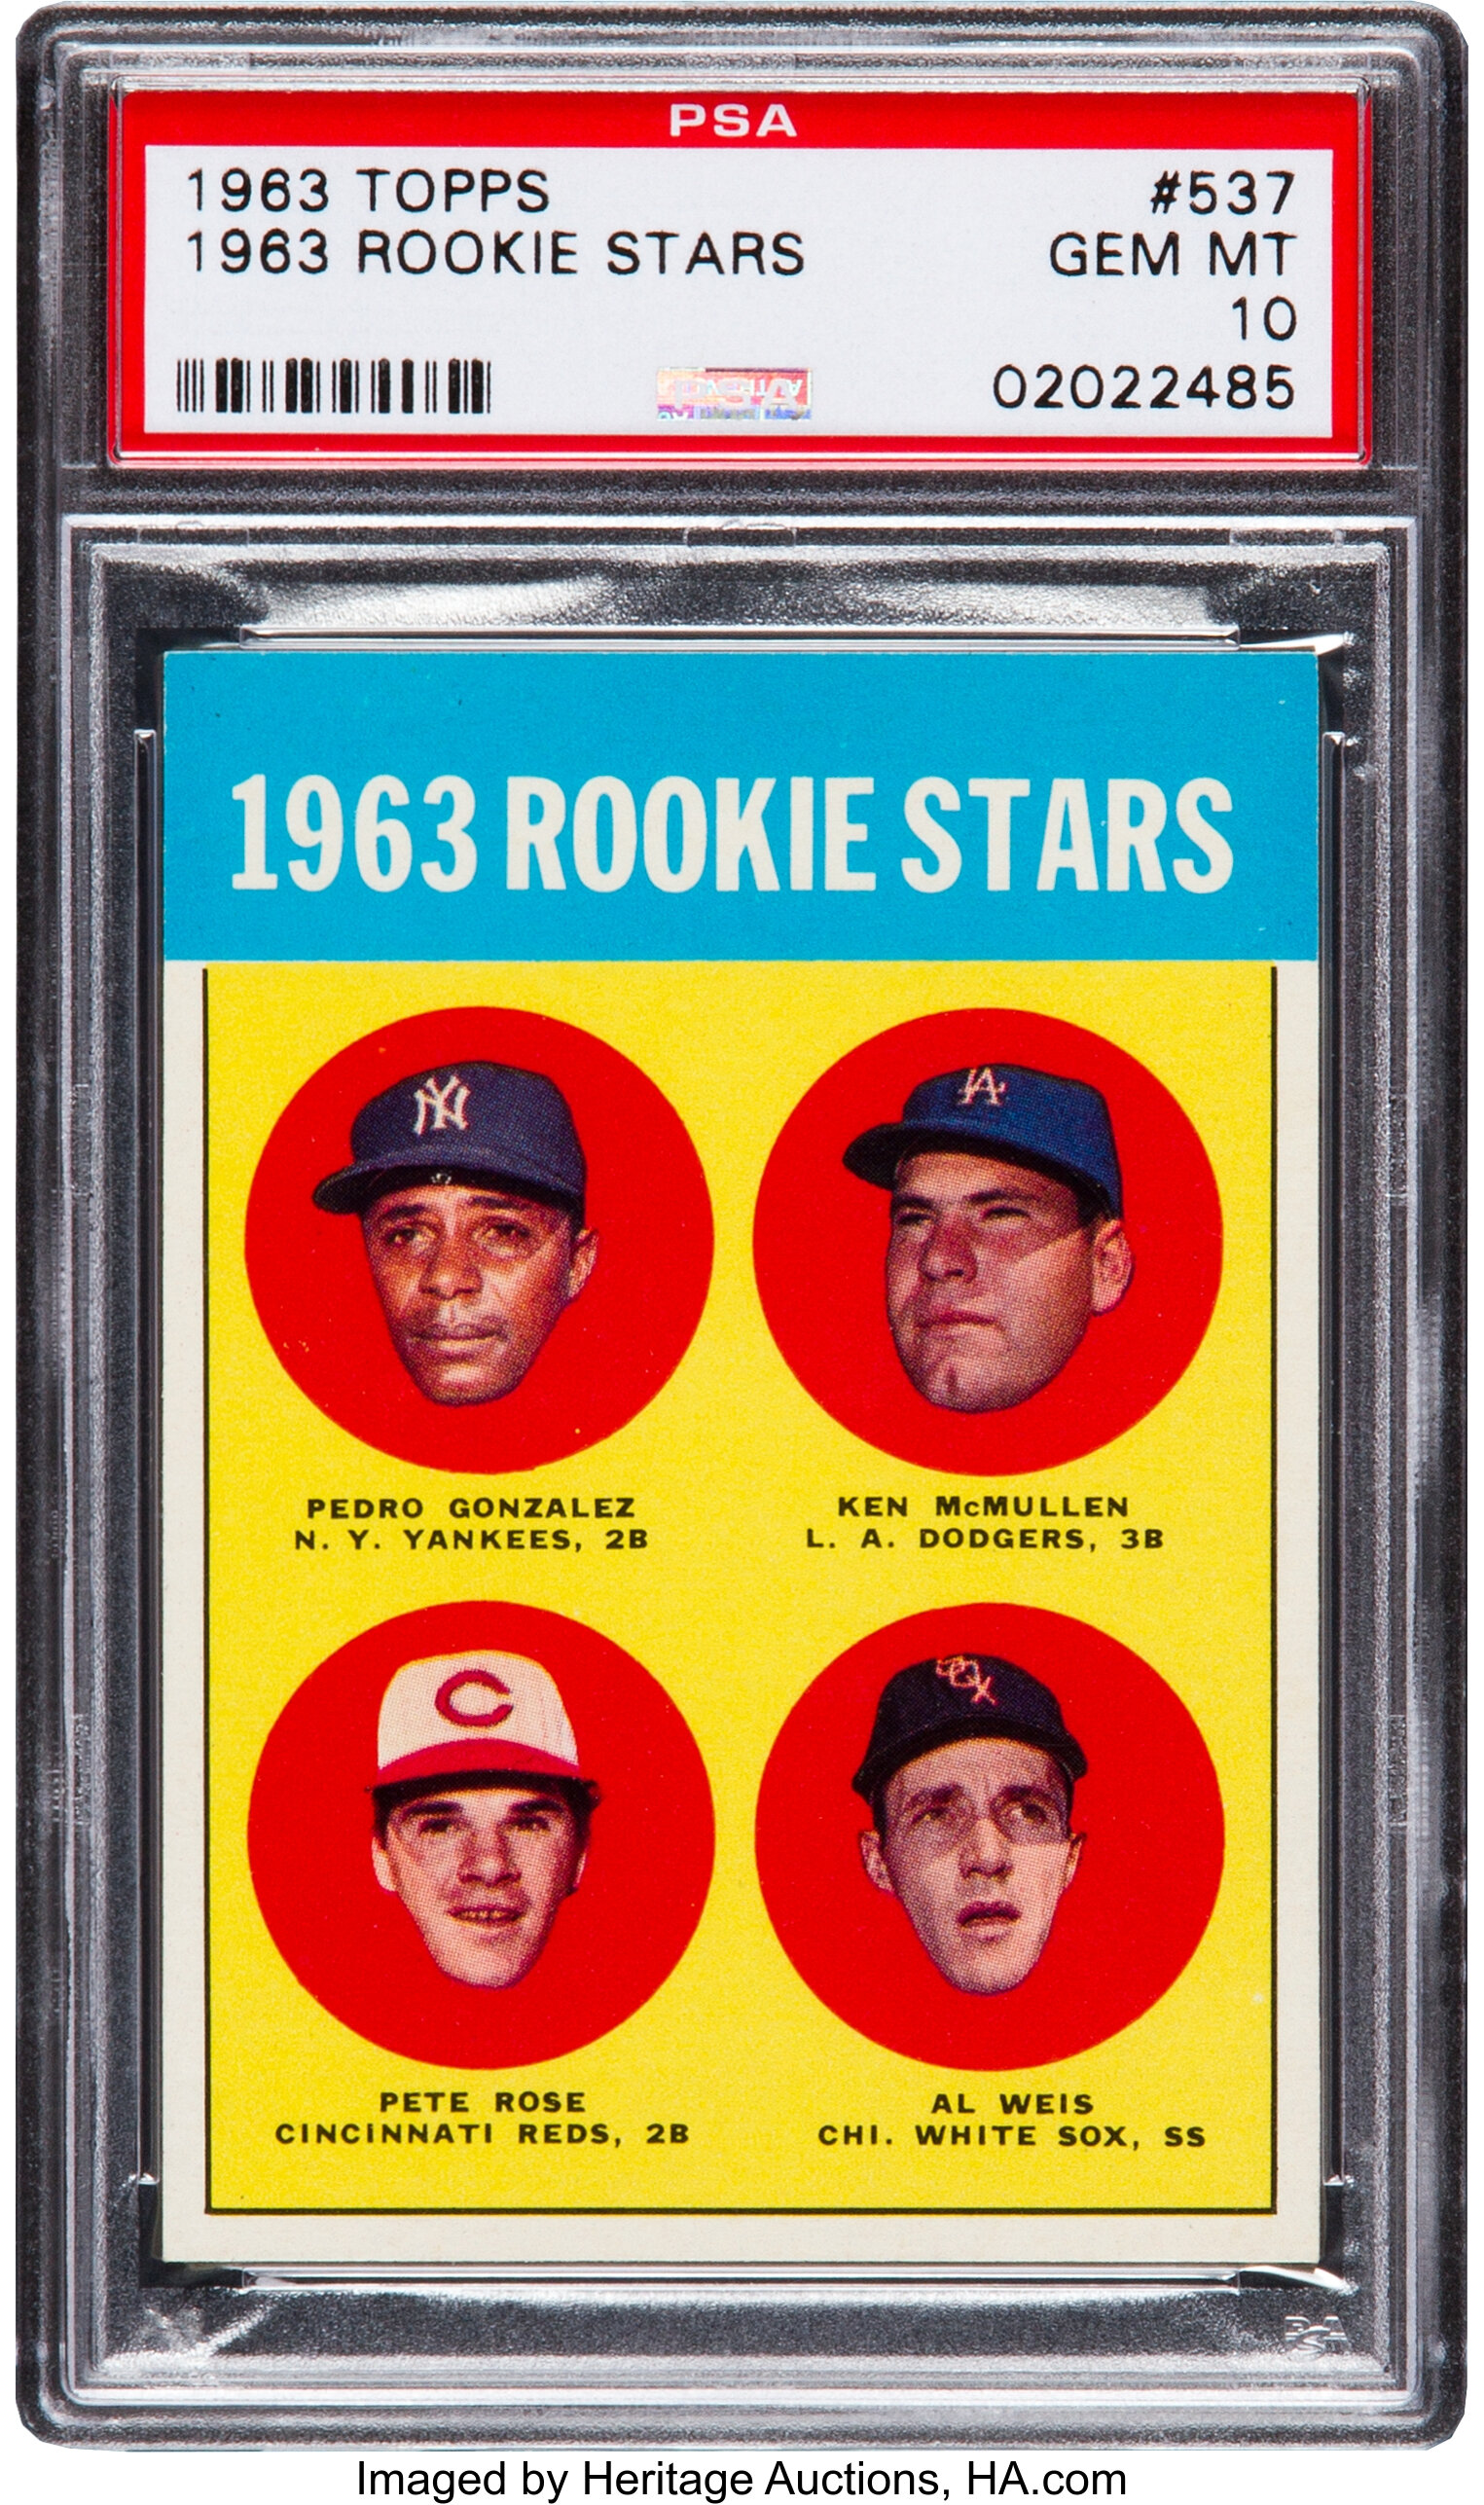 Pete Rose 1964 Topps All-Star Rookie #125. SGC 5 – Brigandi Coins